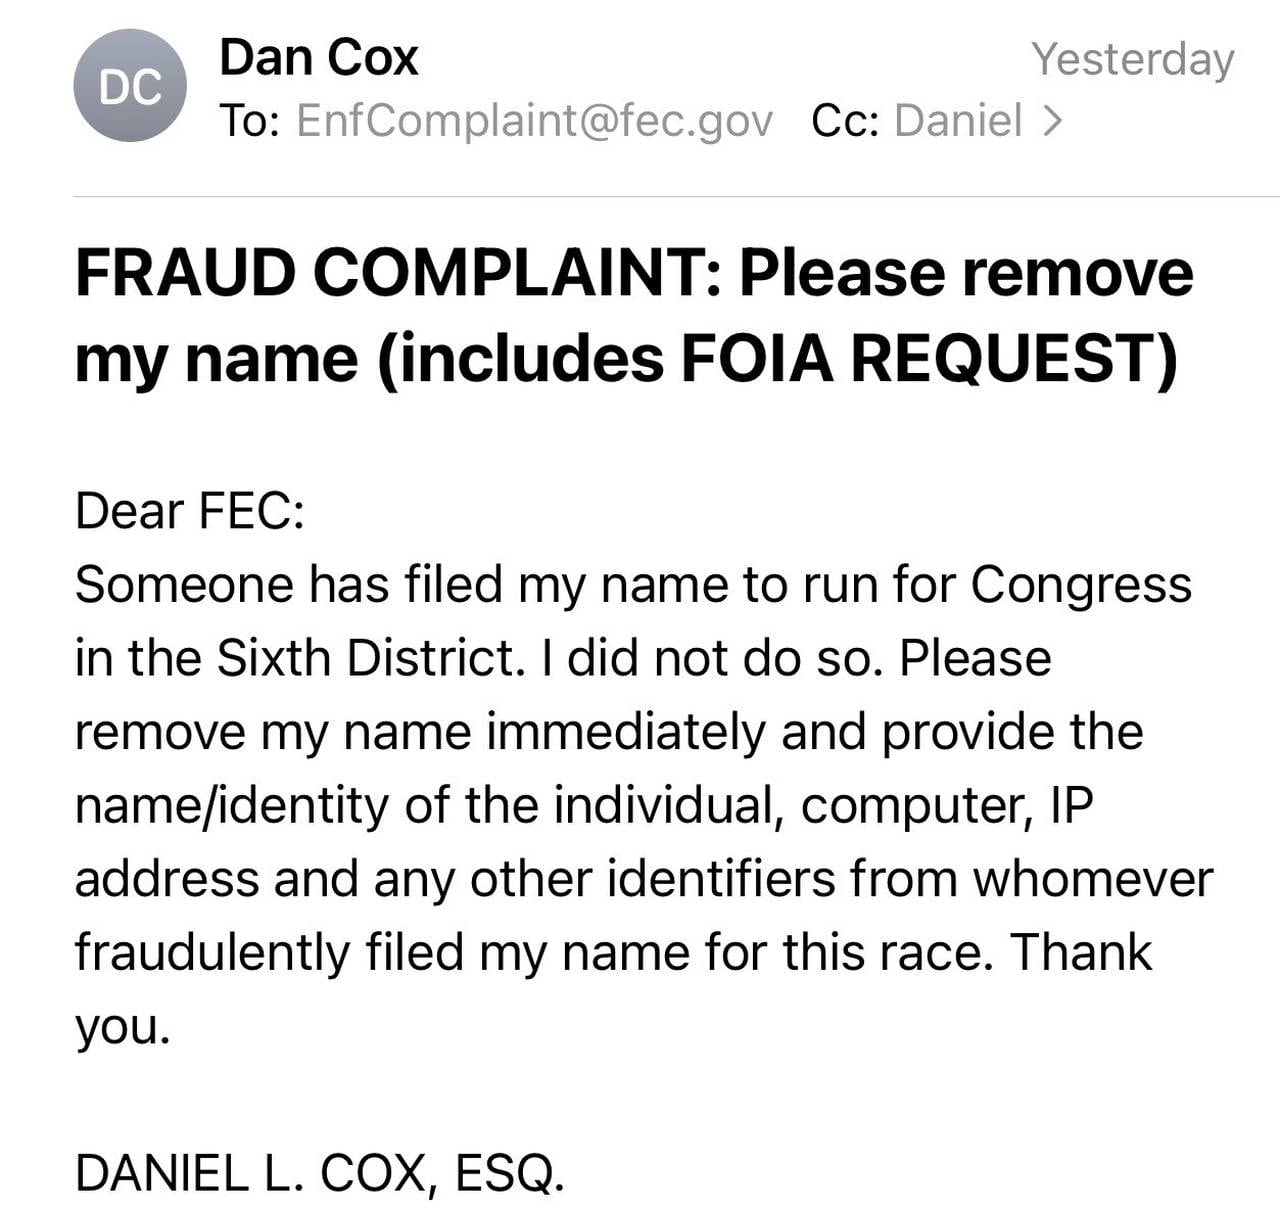 Dan Cox, a former Republican state delegate and candidate for governor, provided this screenshot of an email he sent to the Federal Election Commission, alleging someone fraudulently filed paperwork for him to run for Congress.